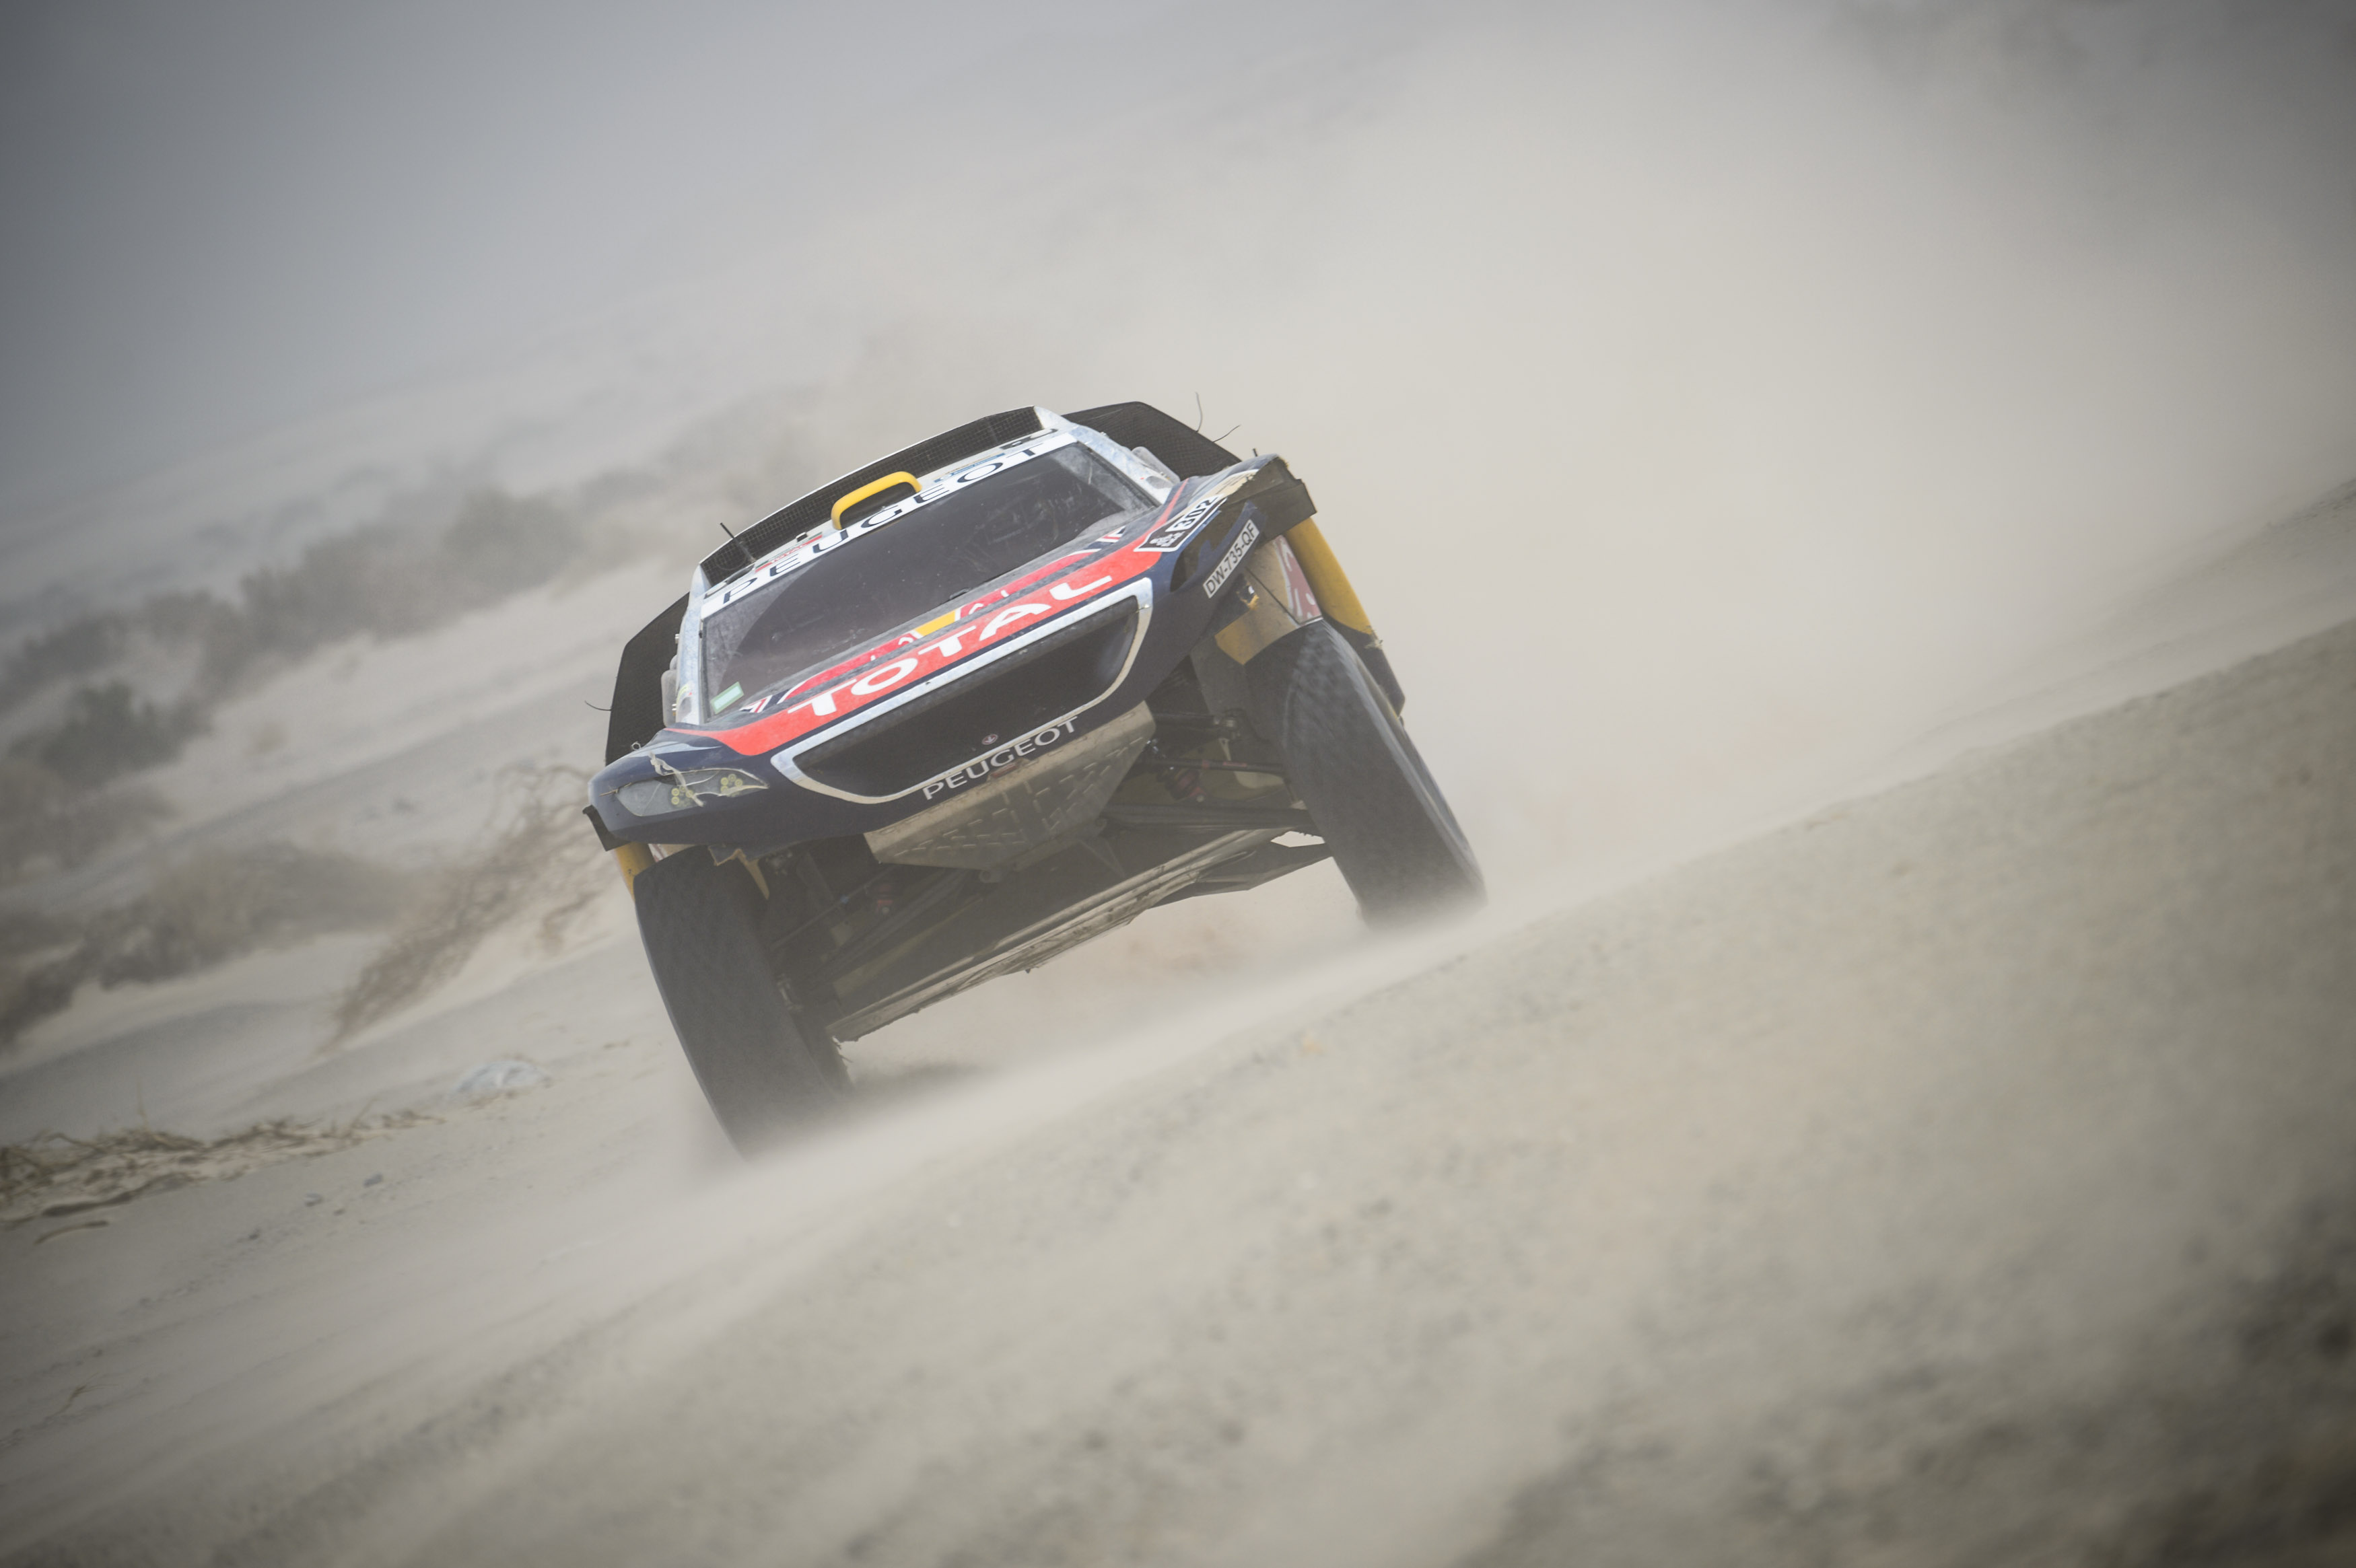 Stephane Peterhansel (FRA) of Team Peugeot-Total races during stage 10 of Rally Dakar 2016 from Belen to La Rioja, Argentina on January 13, 2016